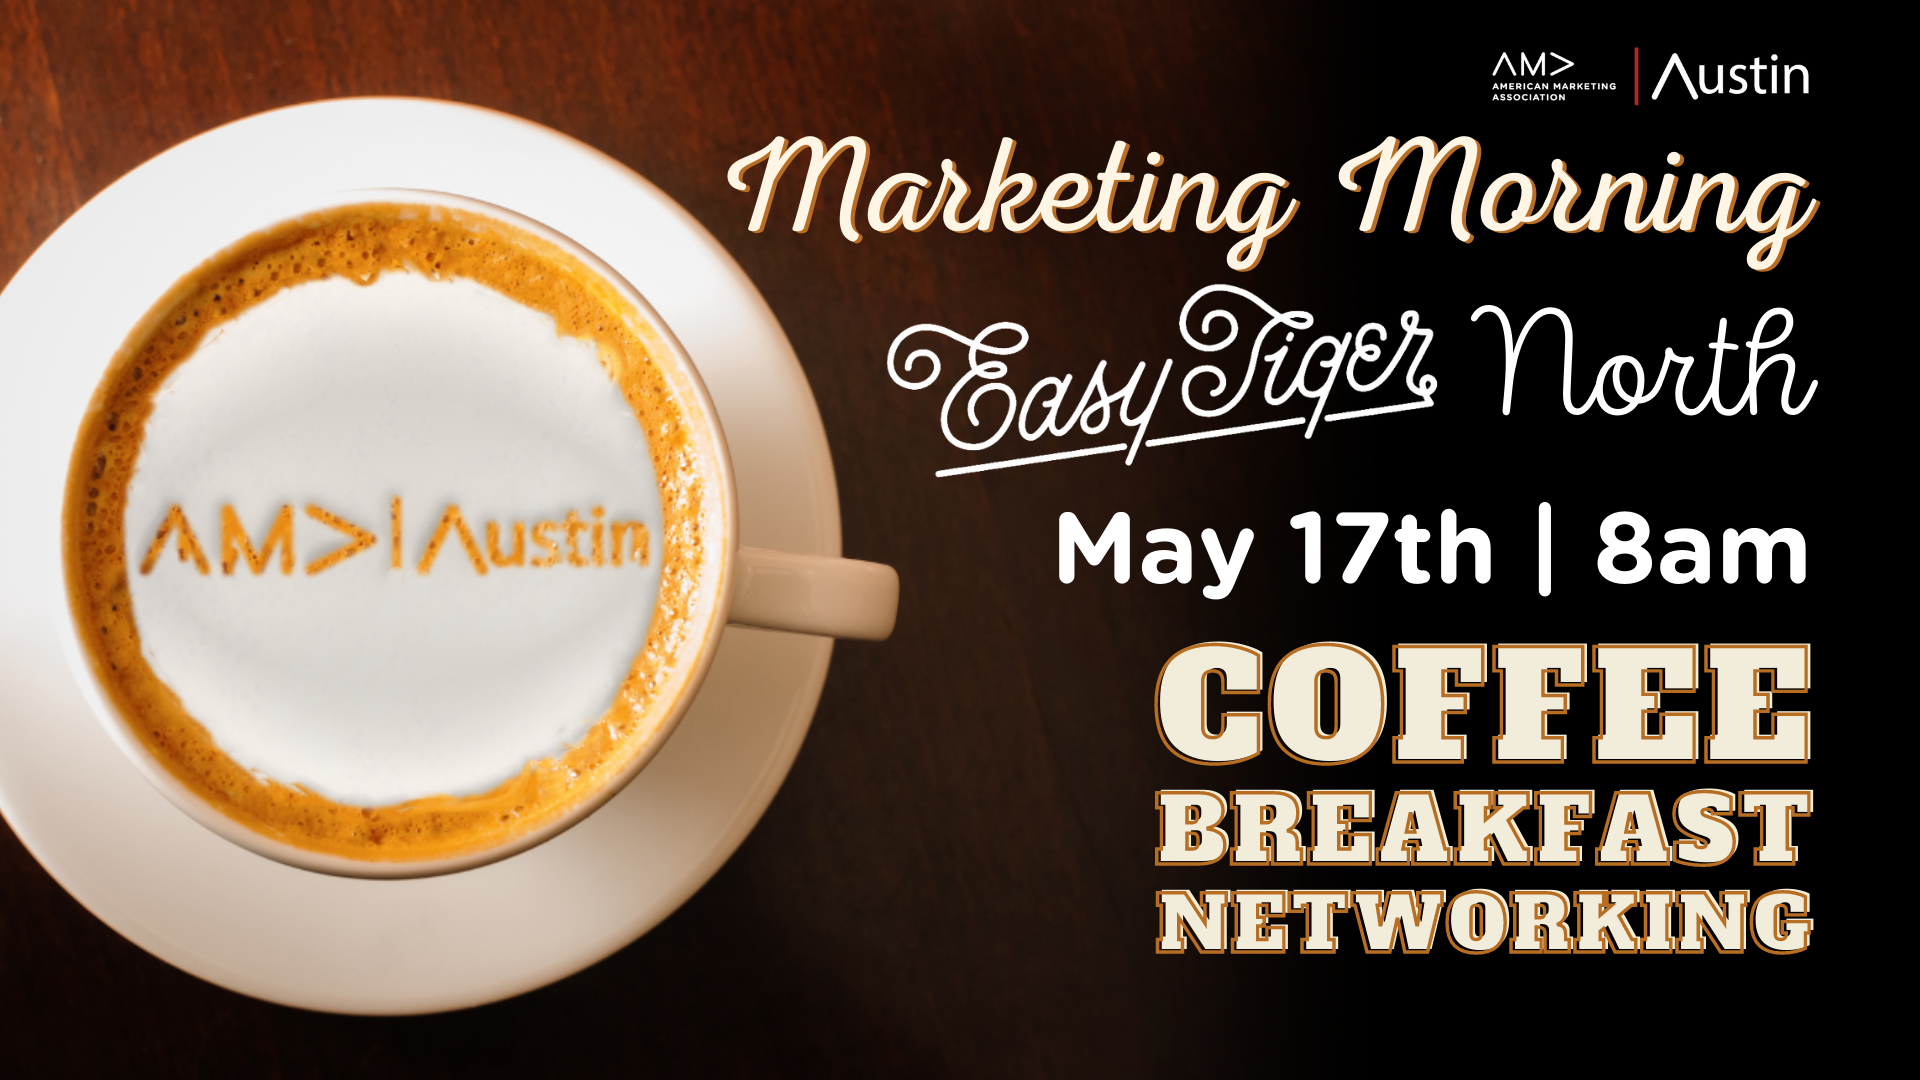 May 17th Marketing Morning Newsletter Promo